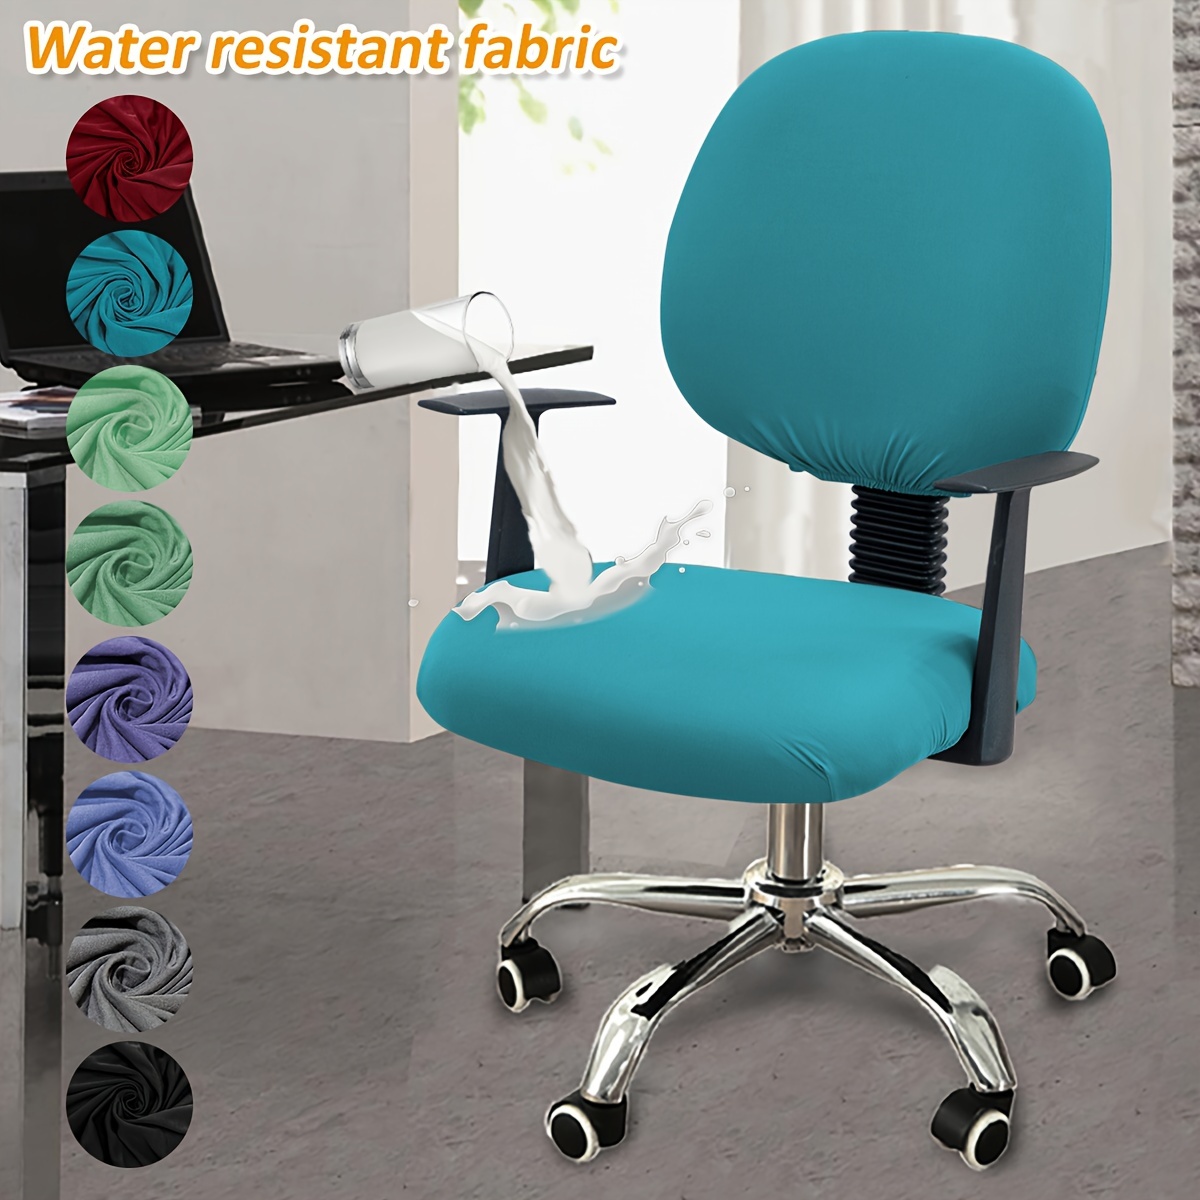 

2pcs/set Stretch Computer Office Chair Slipcovers, Solid Color Chair Covers, Chair Protector Cover For Living Room Office Home Decor